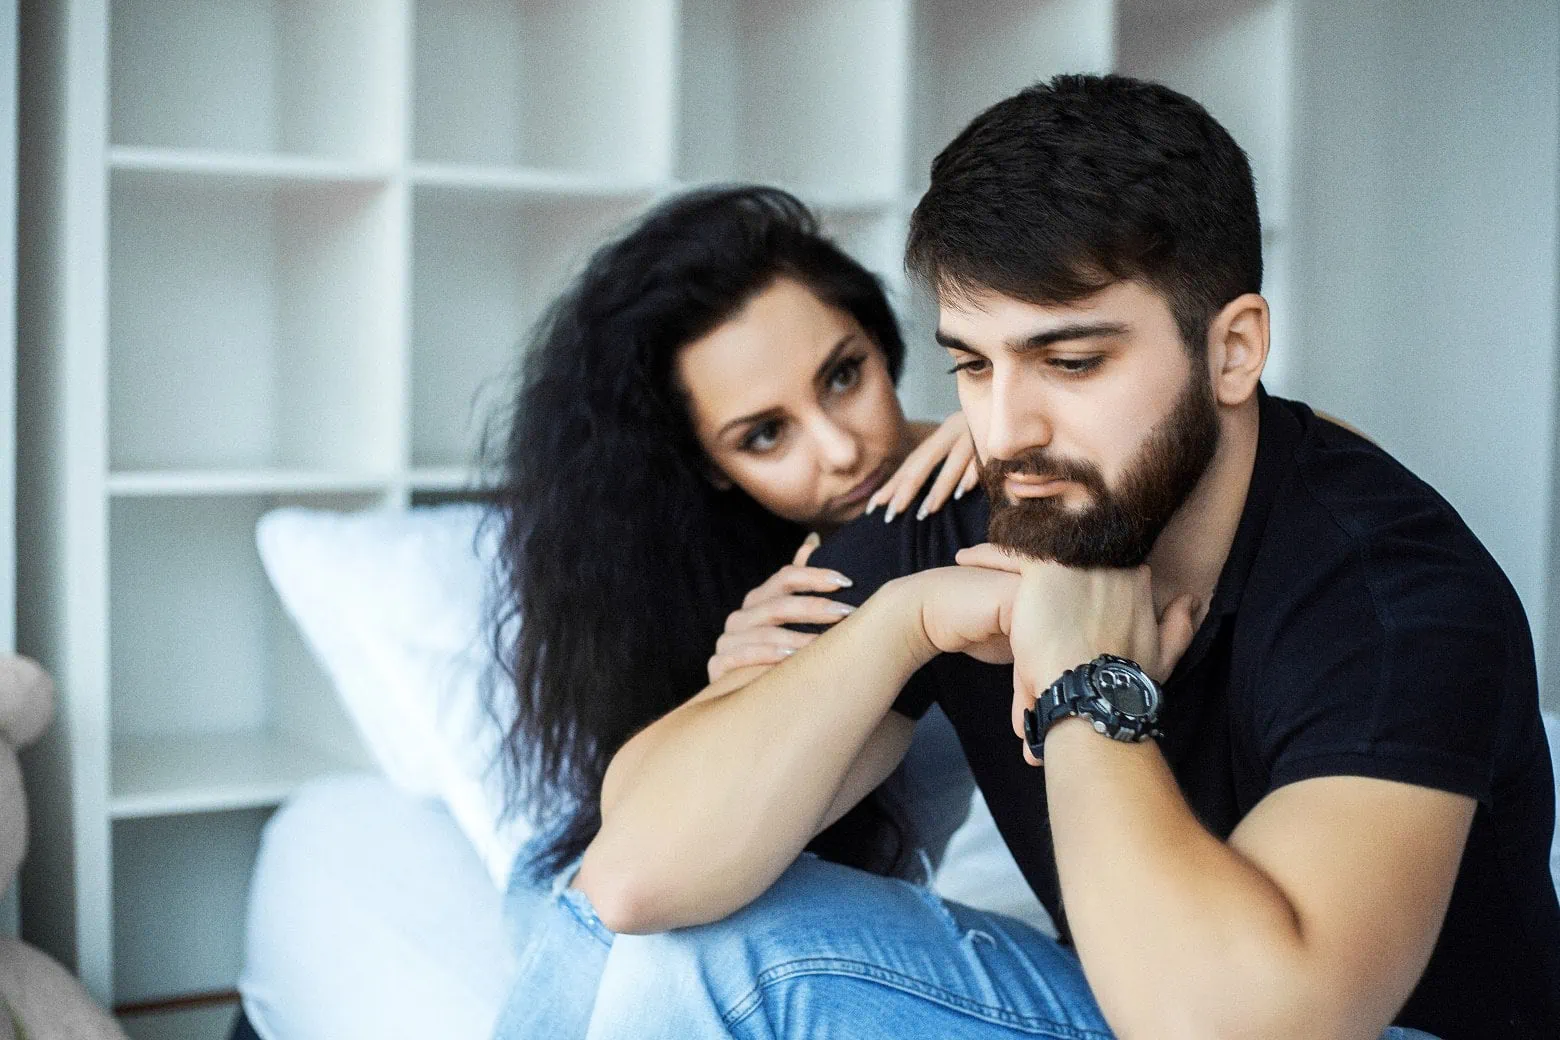 Who Should Consider Couples Therapy - Difficult Time Together